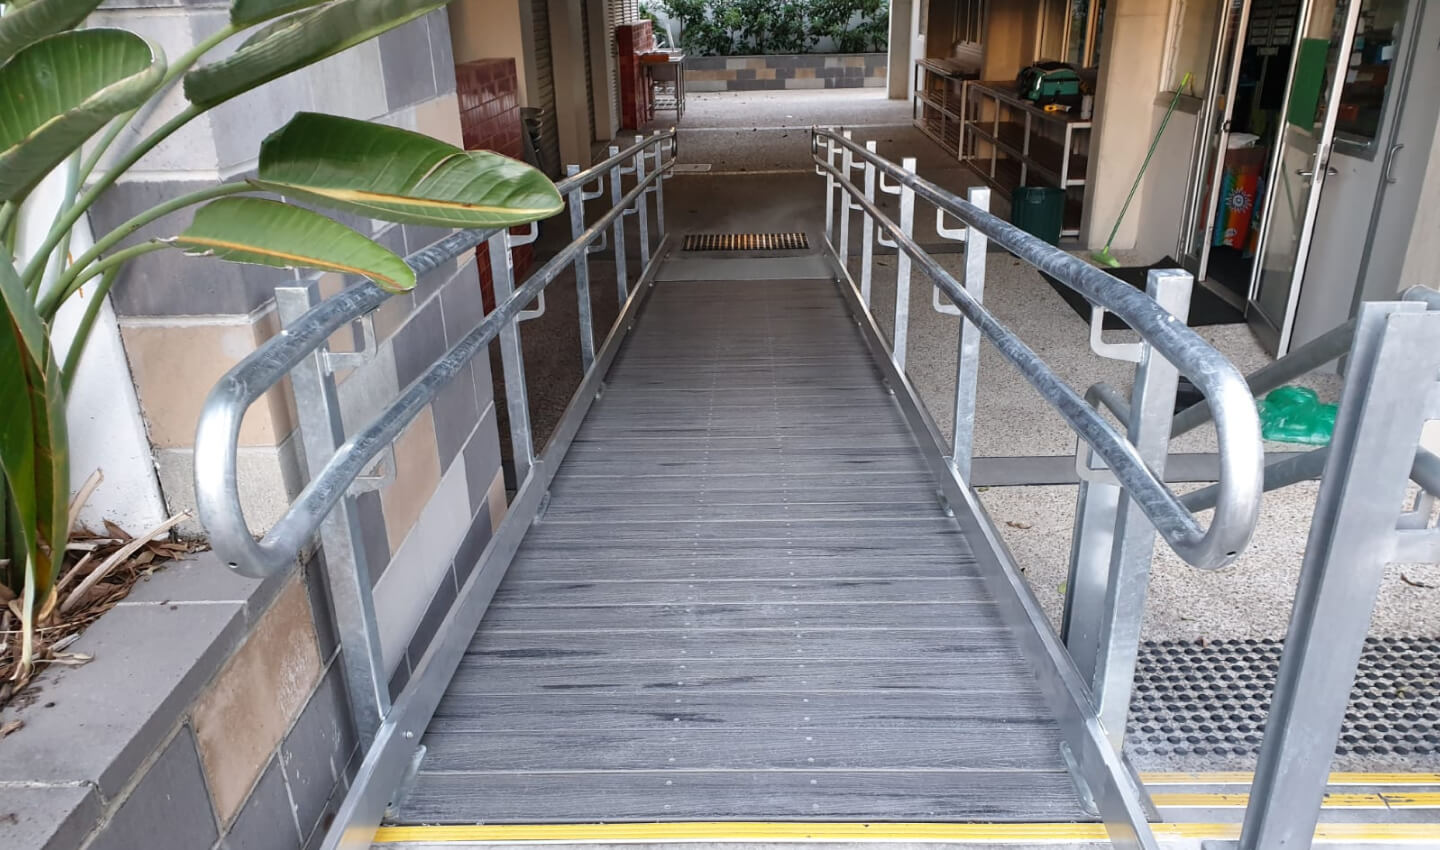 What Makes an Access Ramp Unsafe?